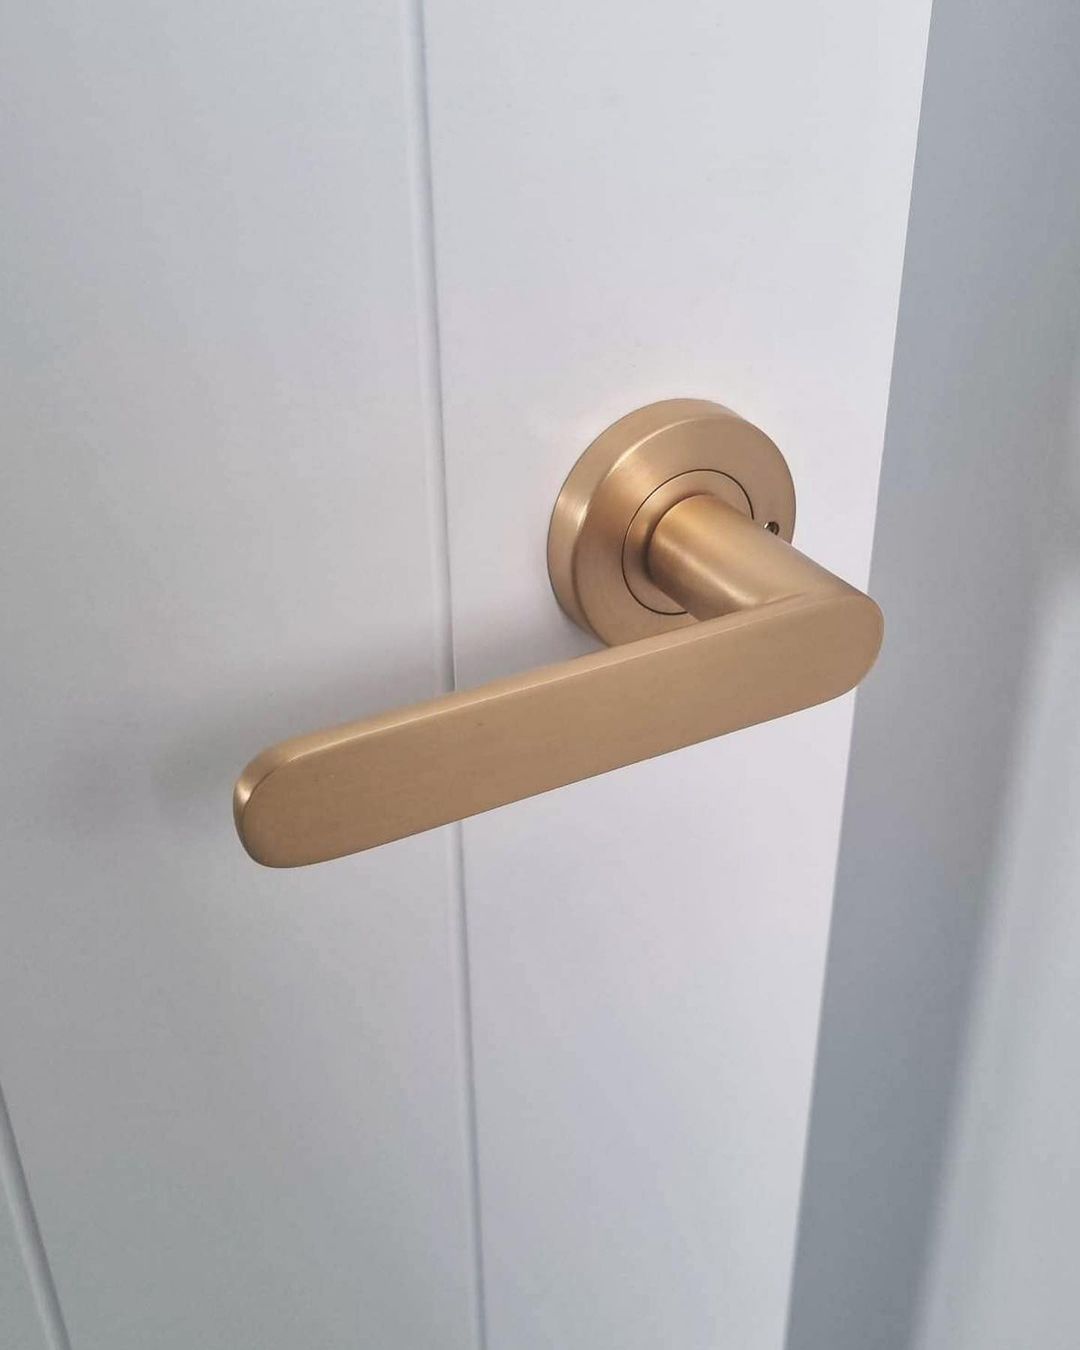 Internal Door Handles: Making Your Home Look Stylish and Sophisticated